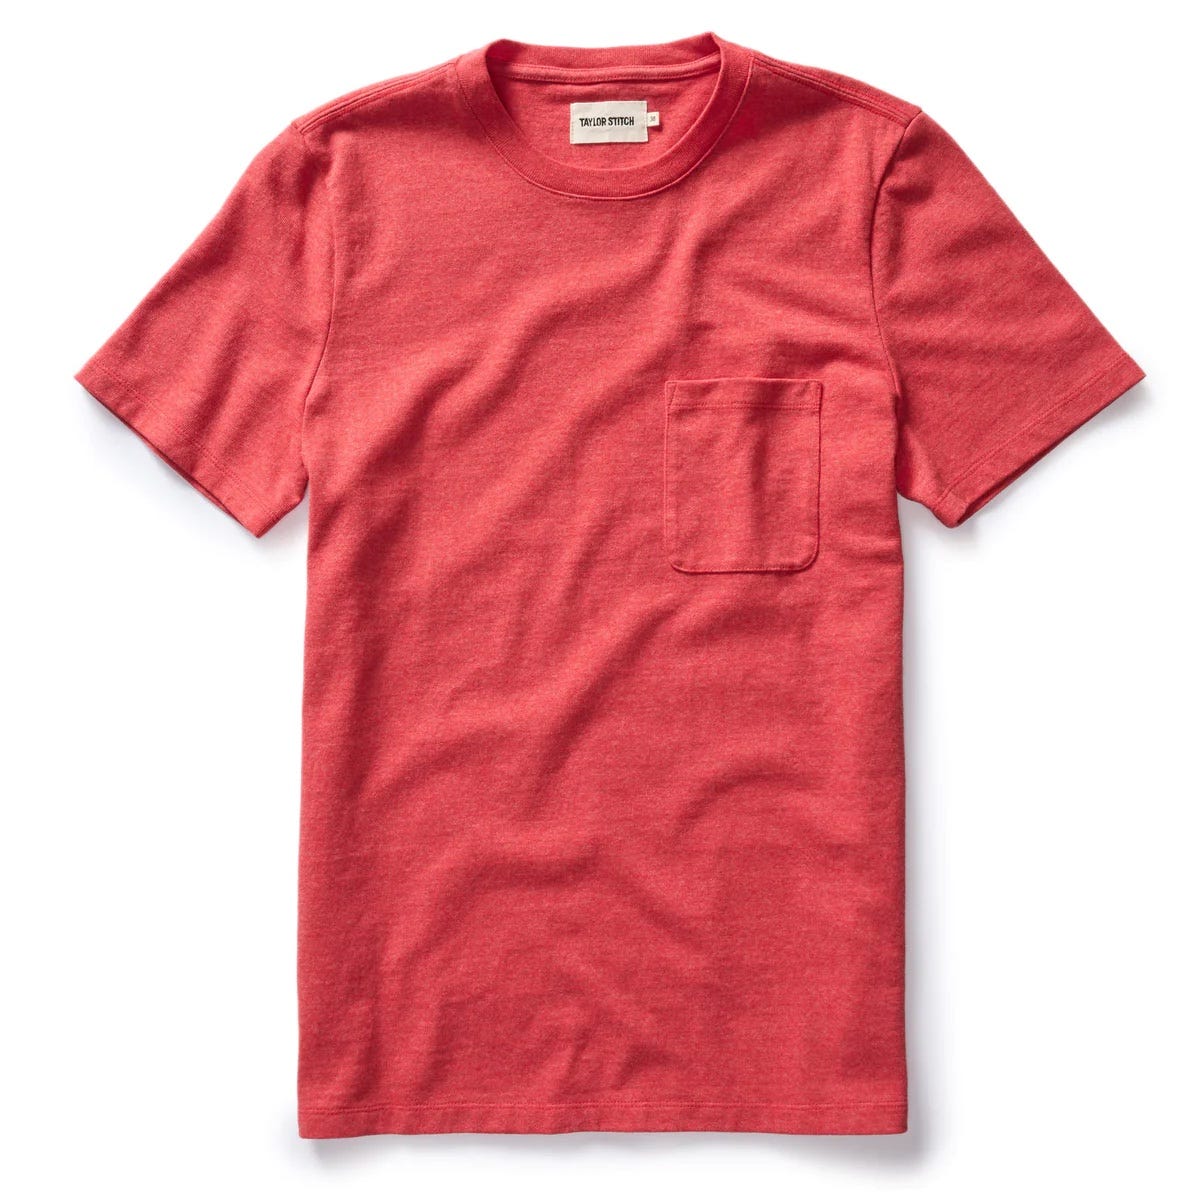 taylor stitch heavy bag tee in cardinal red